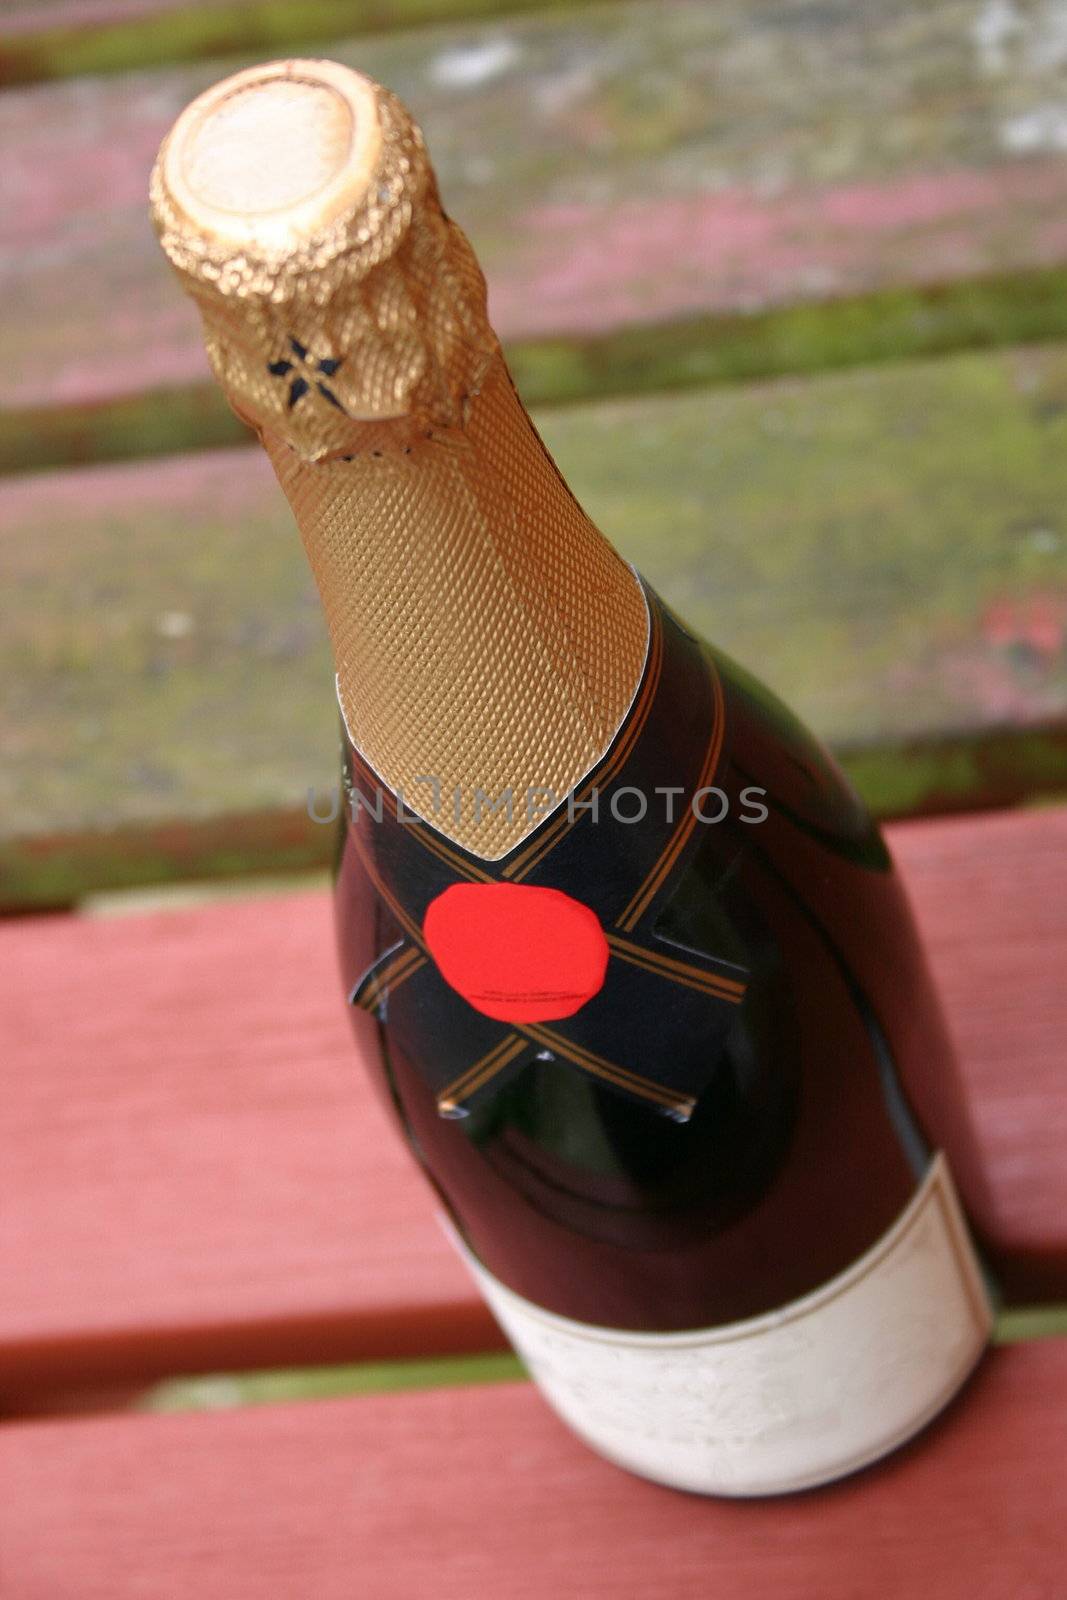 bottle of champagne on a wooden table